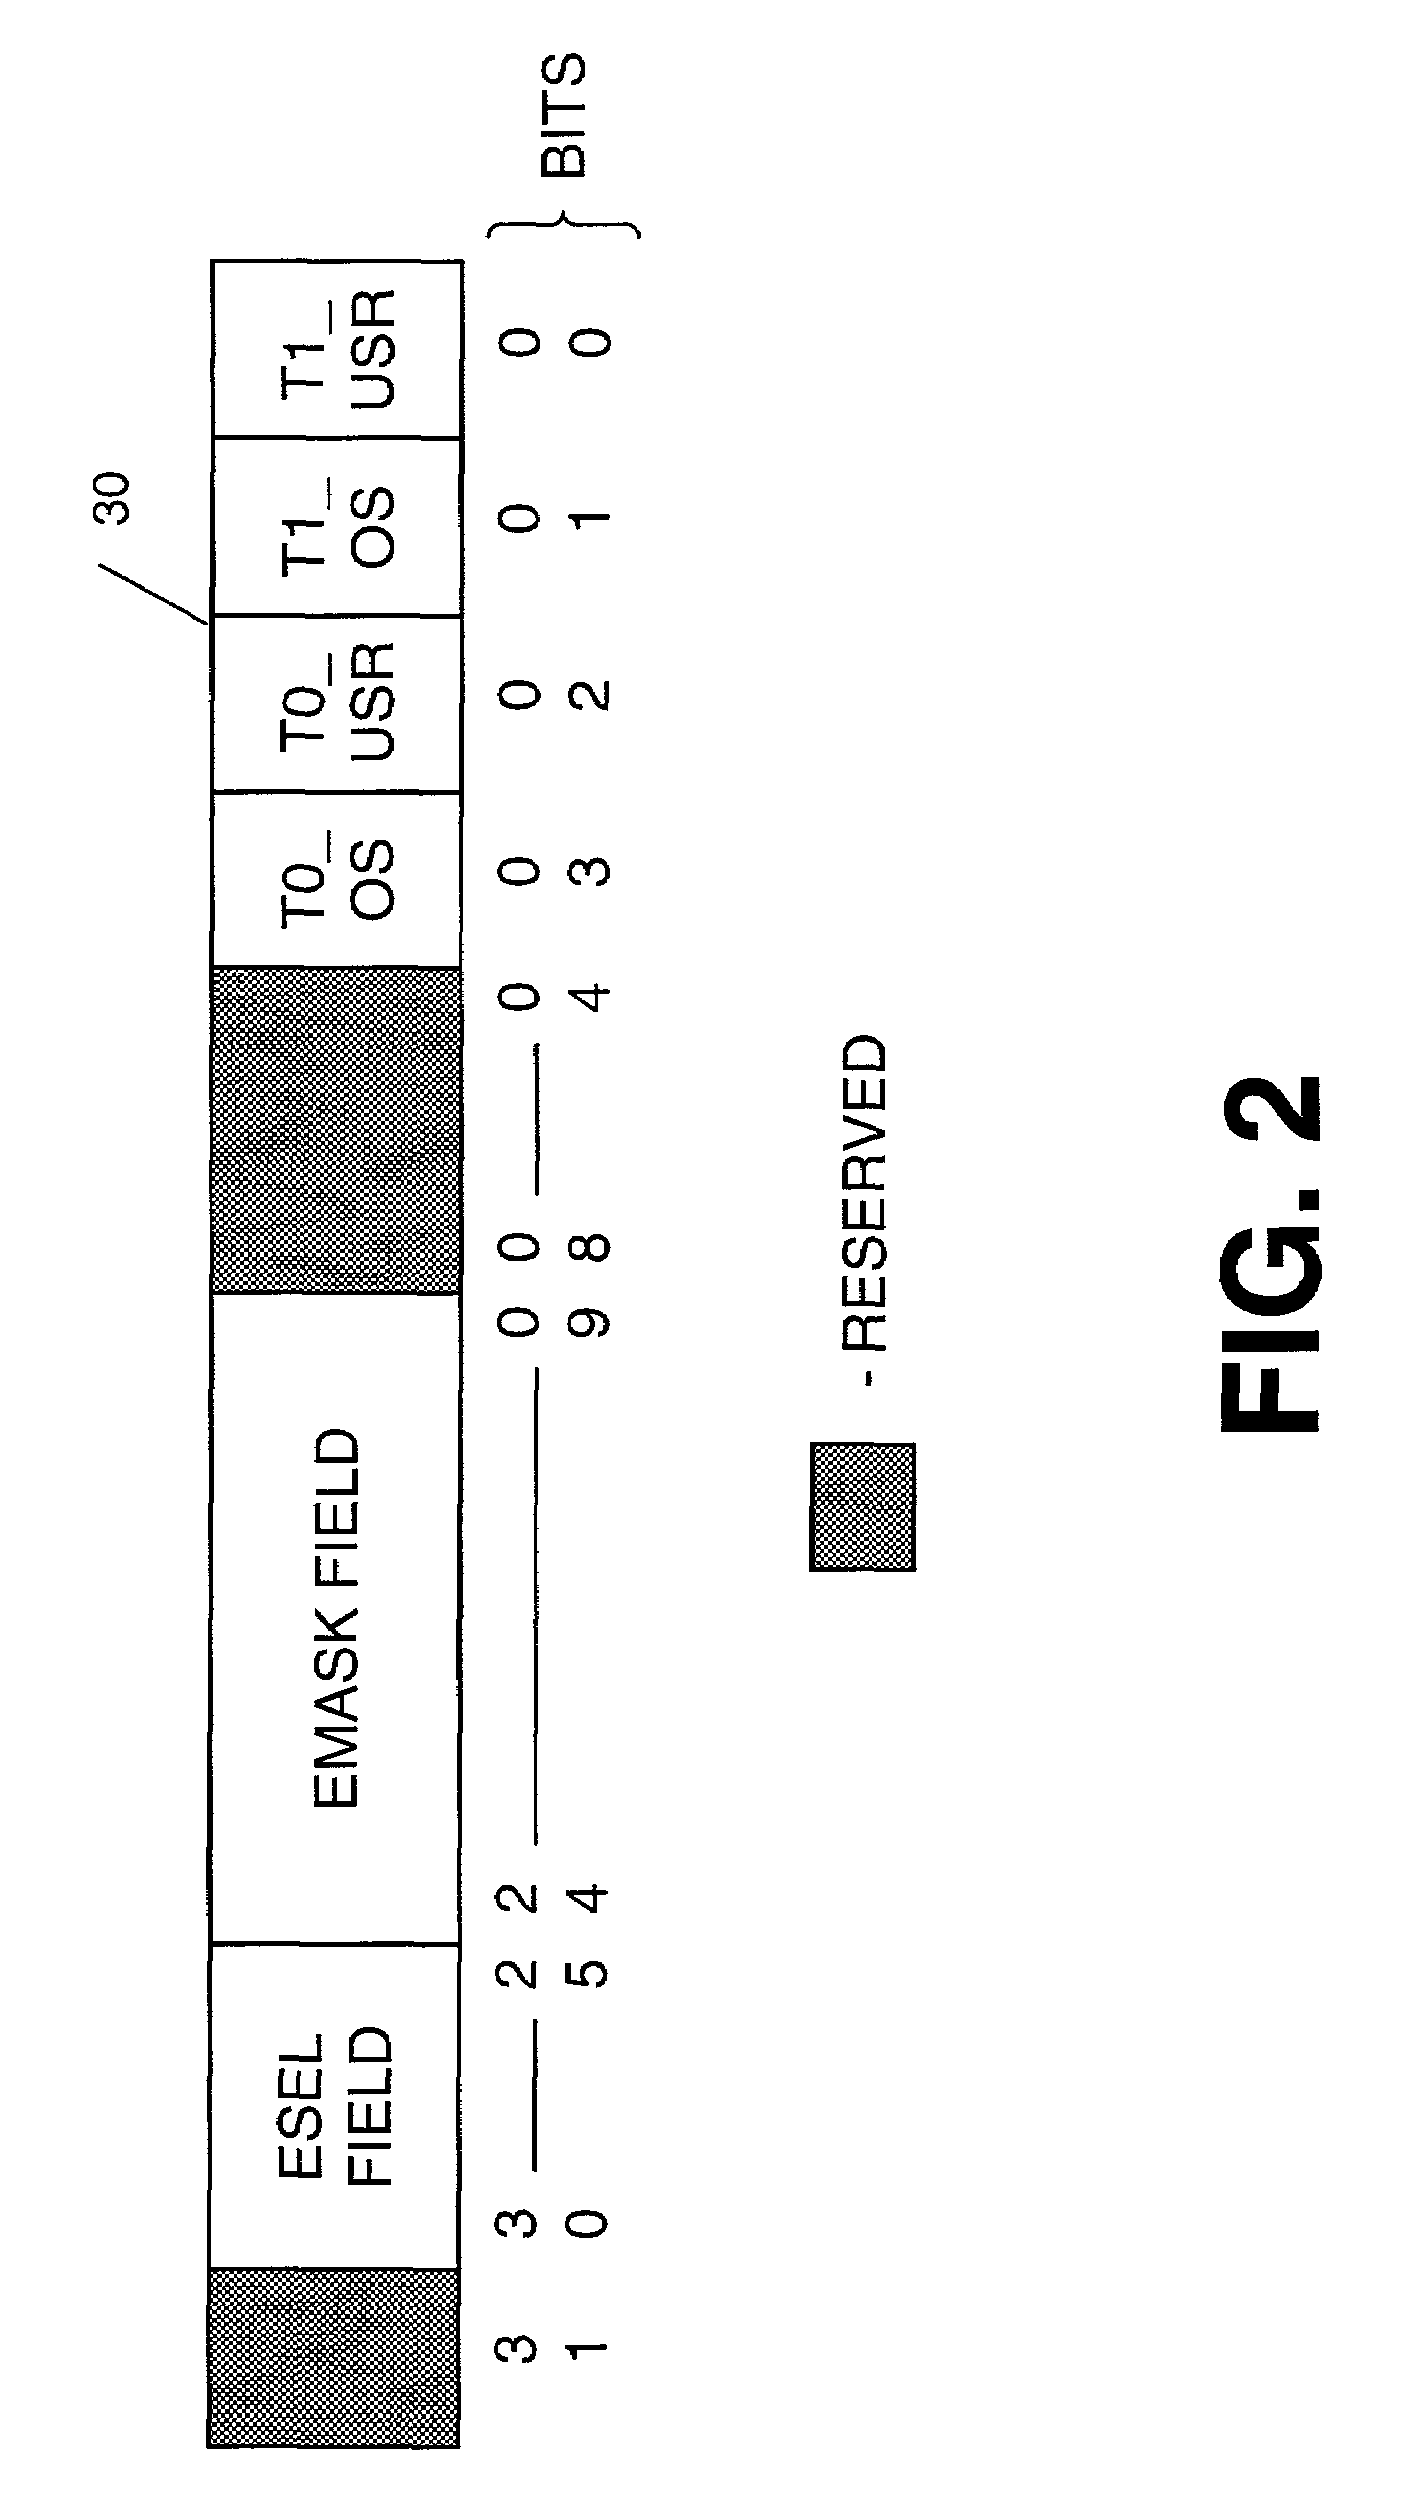 Qualification of event detection by thread ID and thread privilege level